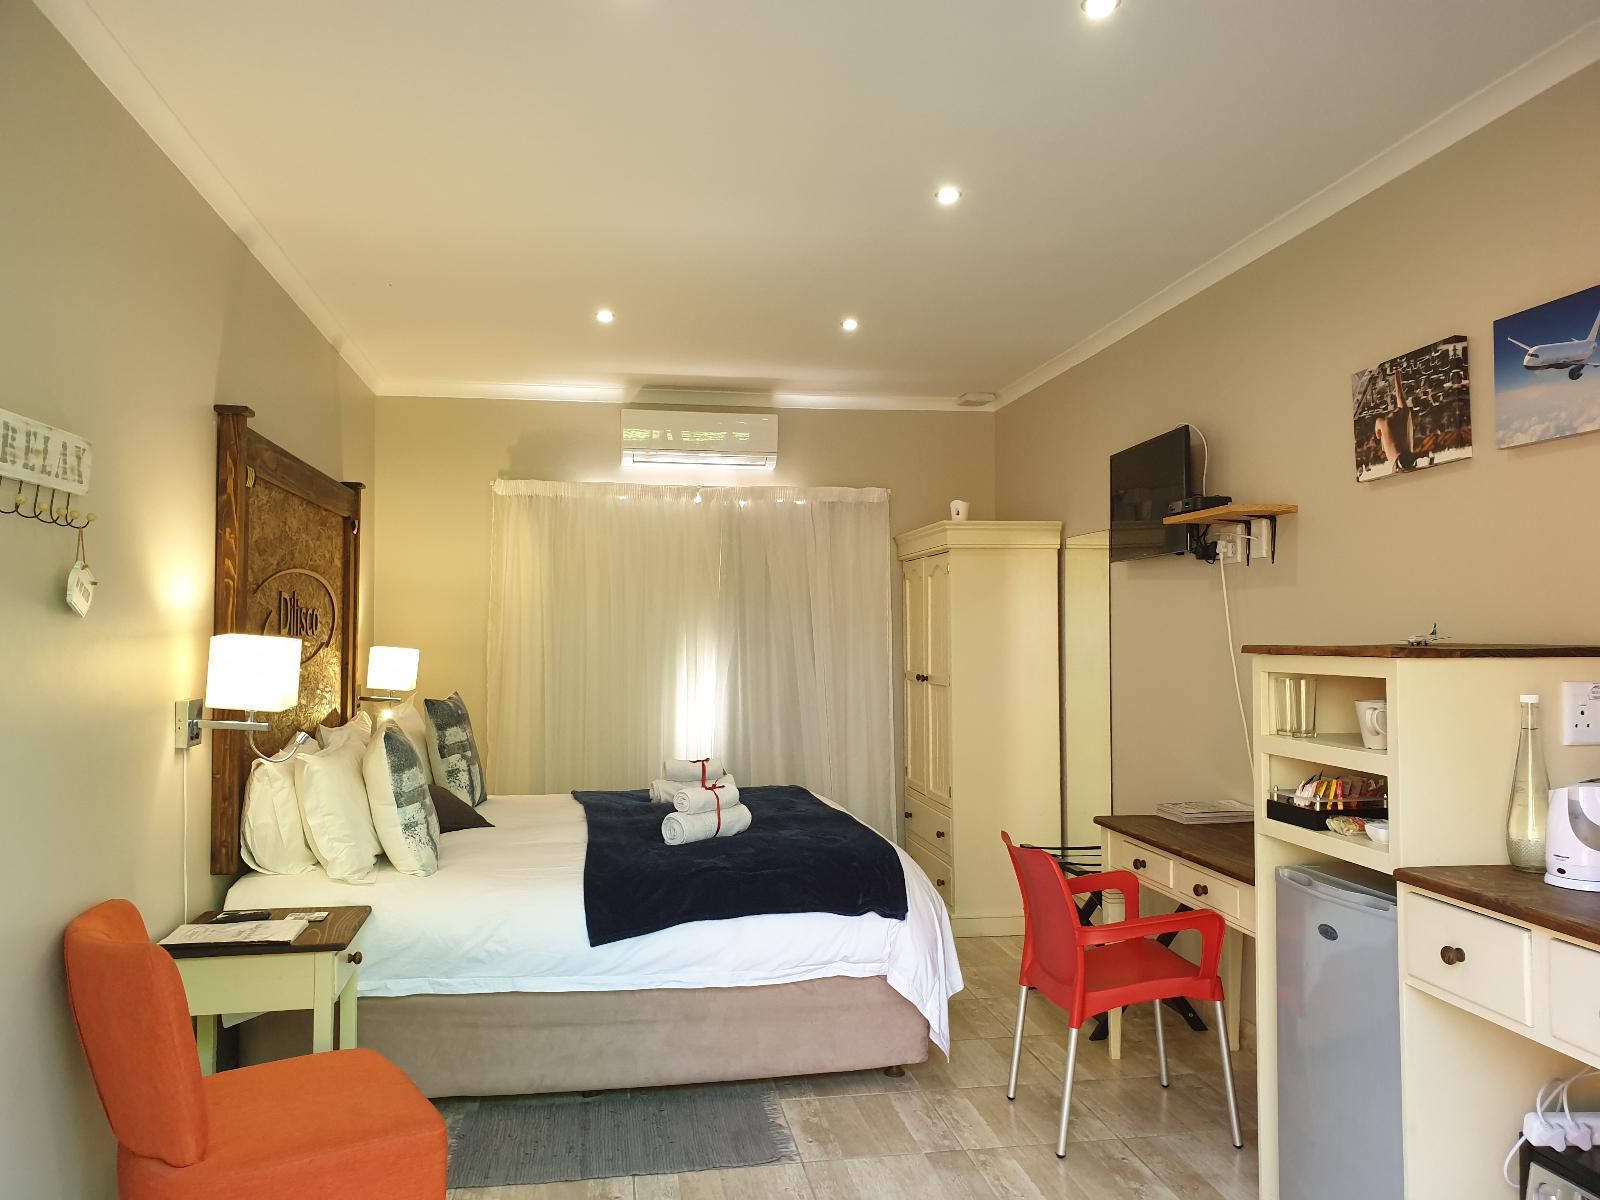 Dilisca Guesthouse Durbanville Cape Town Western Cape South Africa Bedroom